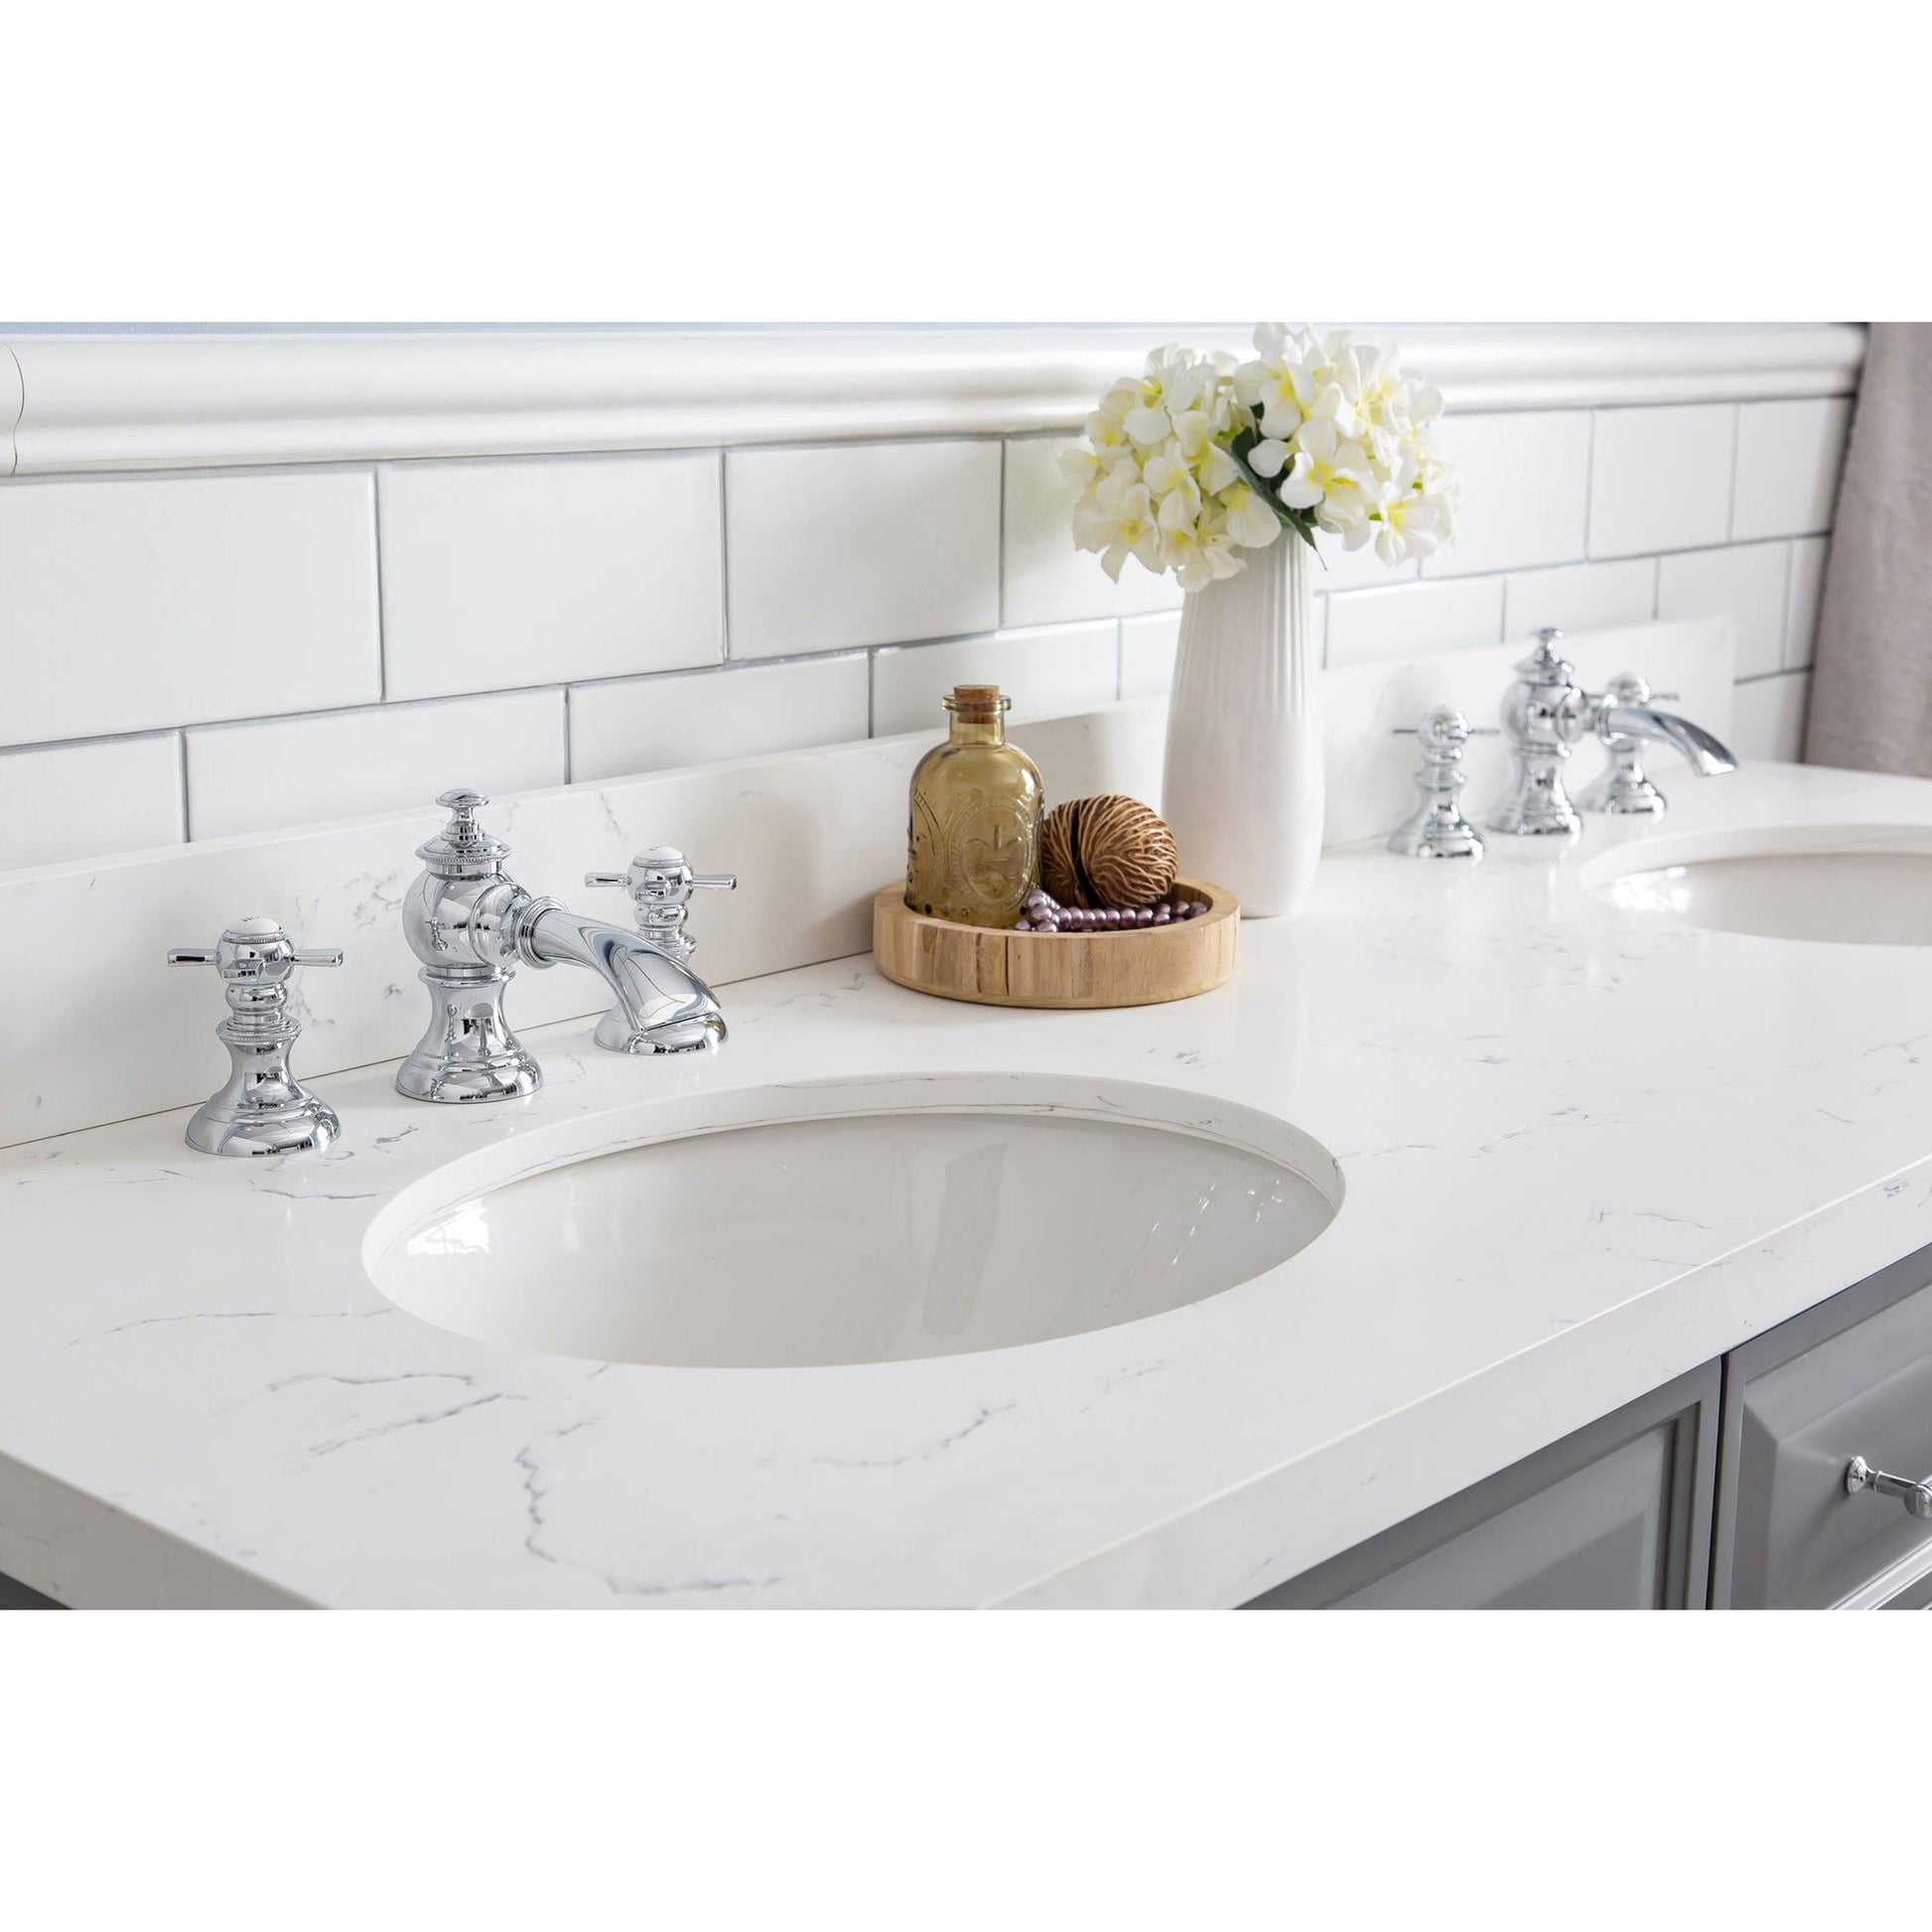 Water Creation Palace 60" Quartz Carrara Cashmere Grey Bathroom Vanity Set With Hardware And F2-0013 Faucets, Mirror in Chrome Finish